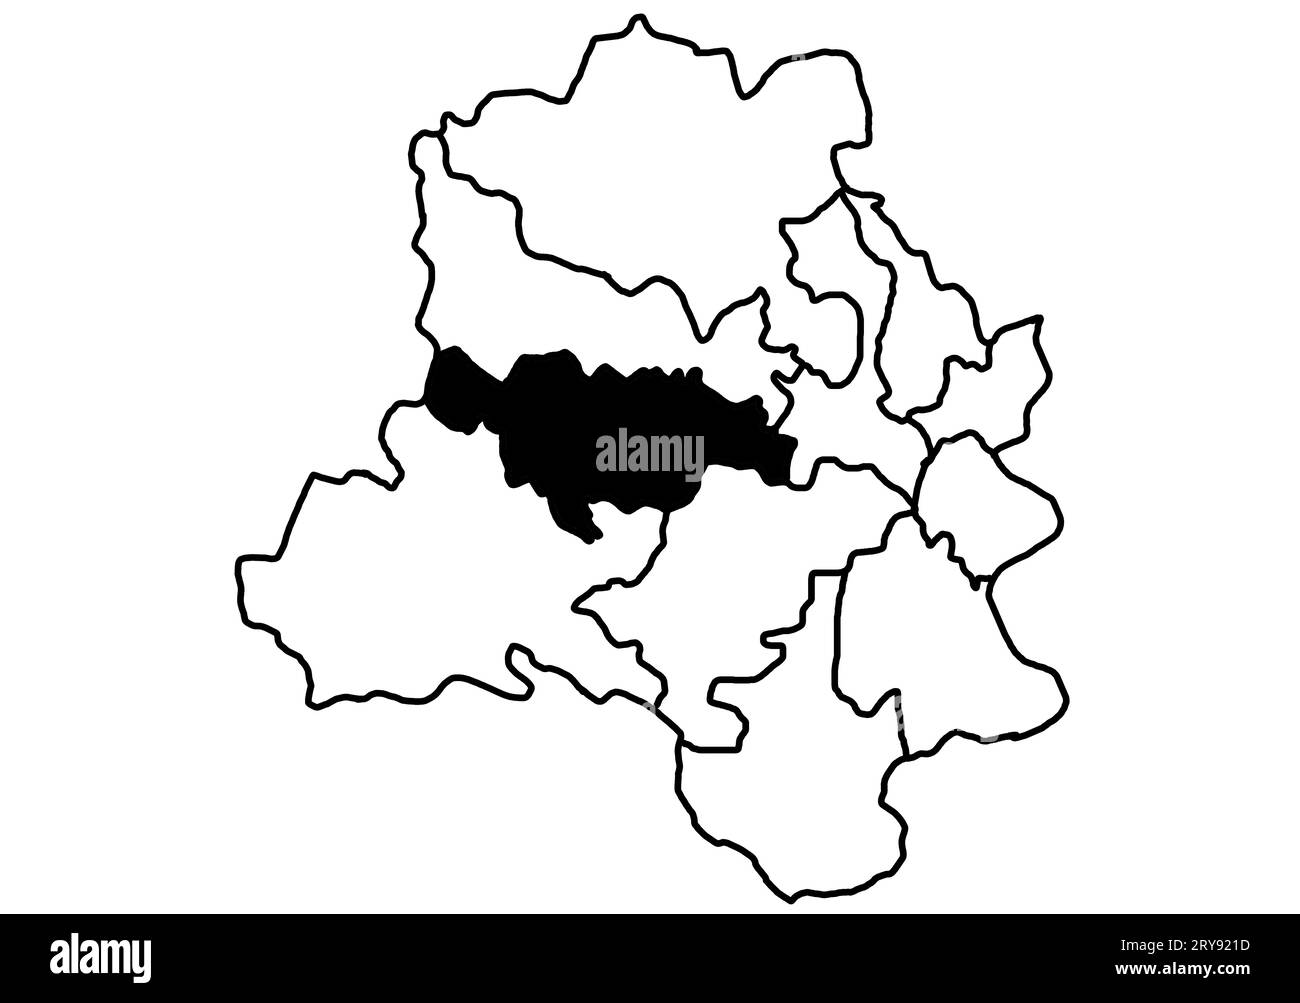 West Delhi, India Map Black Silhouette and Outline Isolated on White. Stock Photo